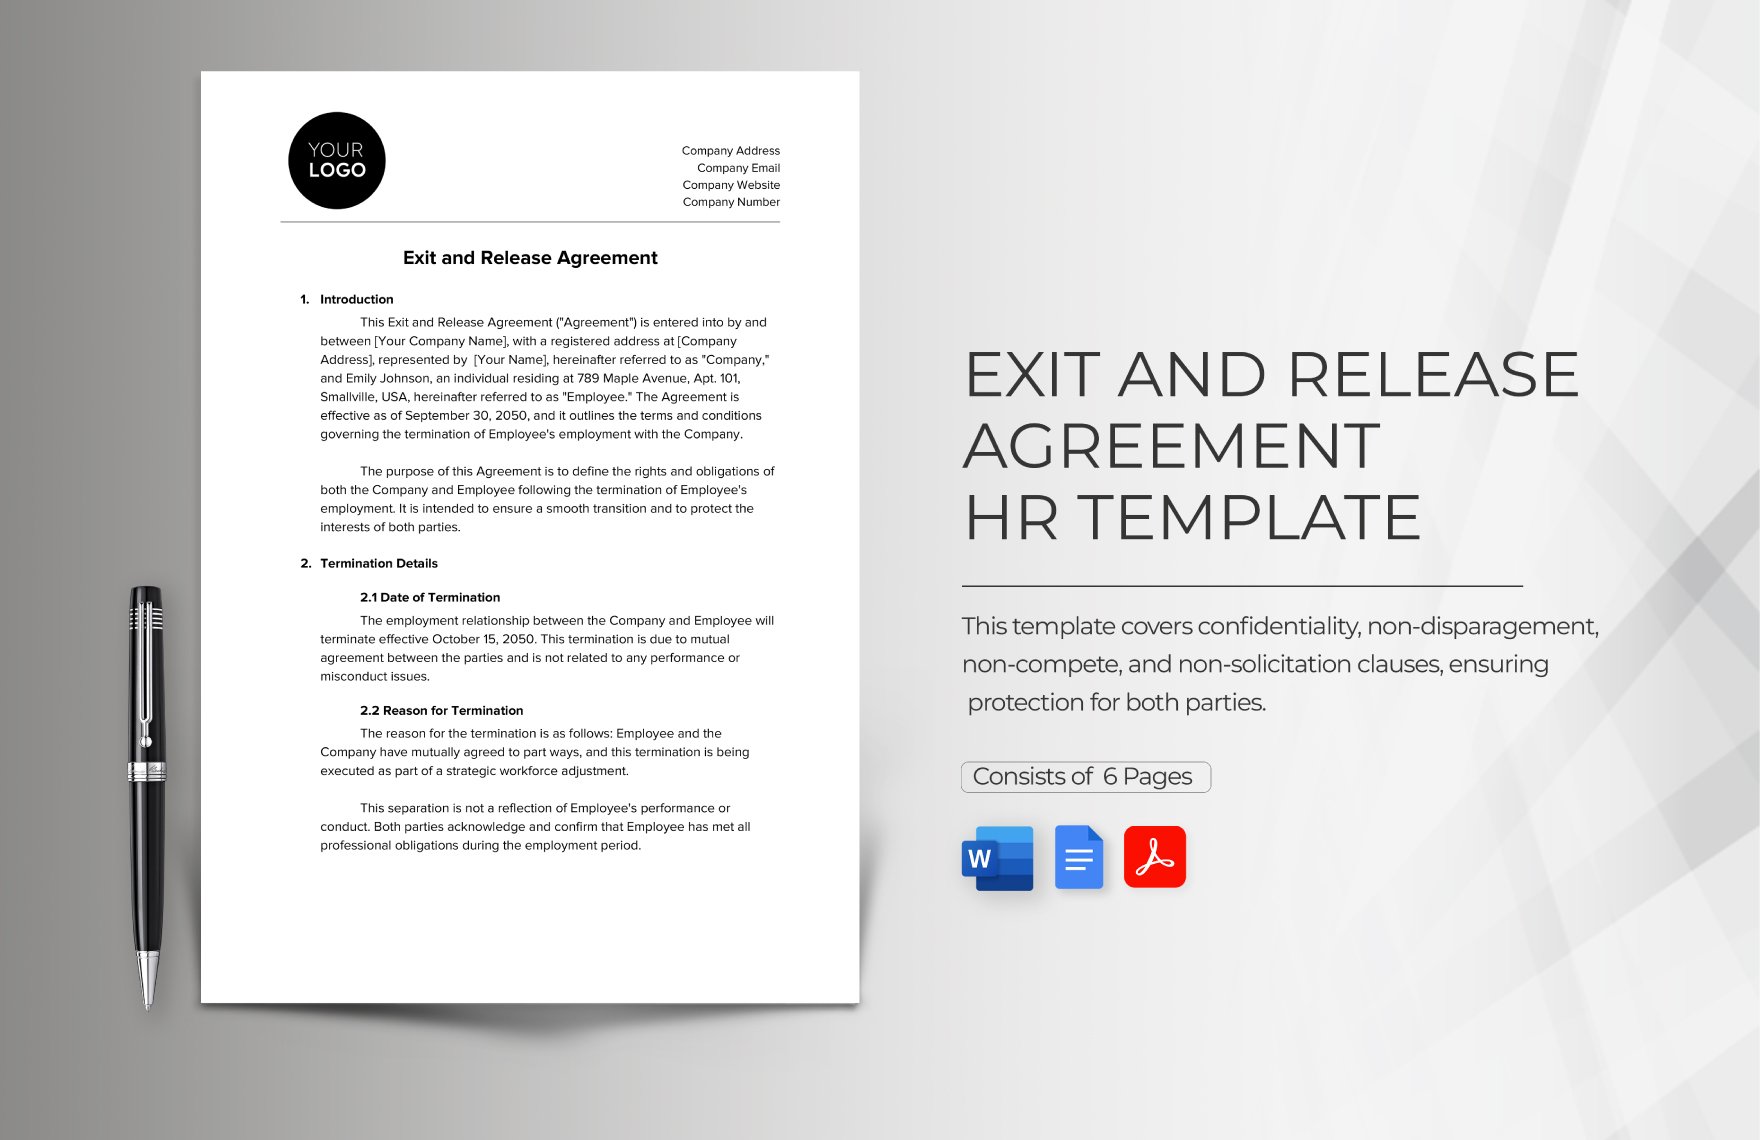 Exit and Release Agreement HR Template